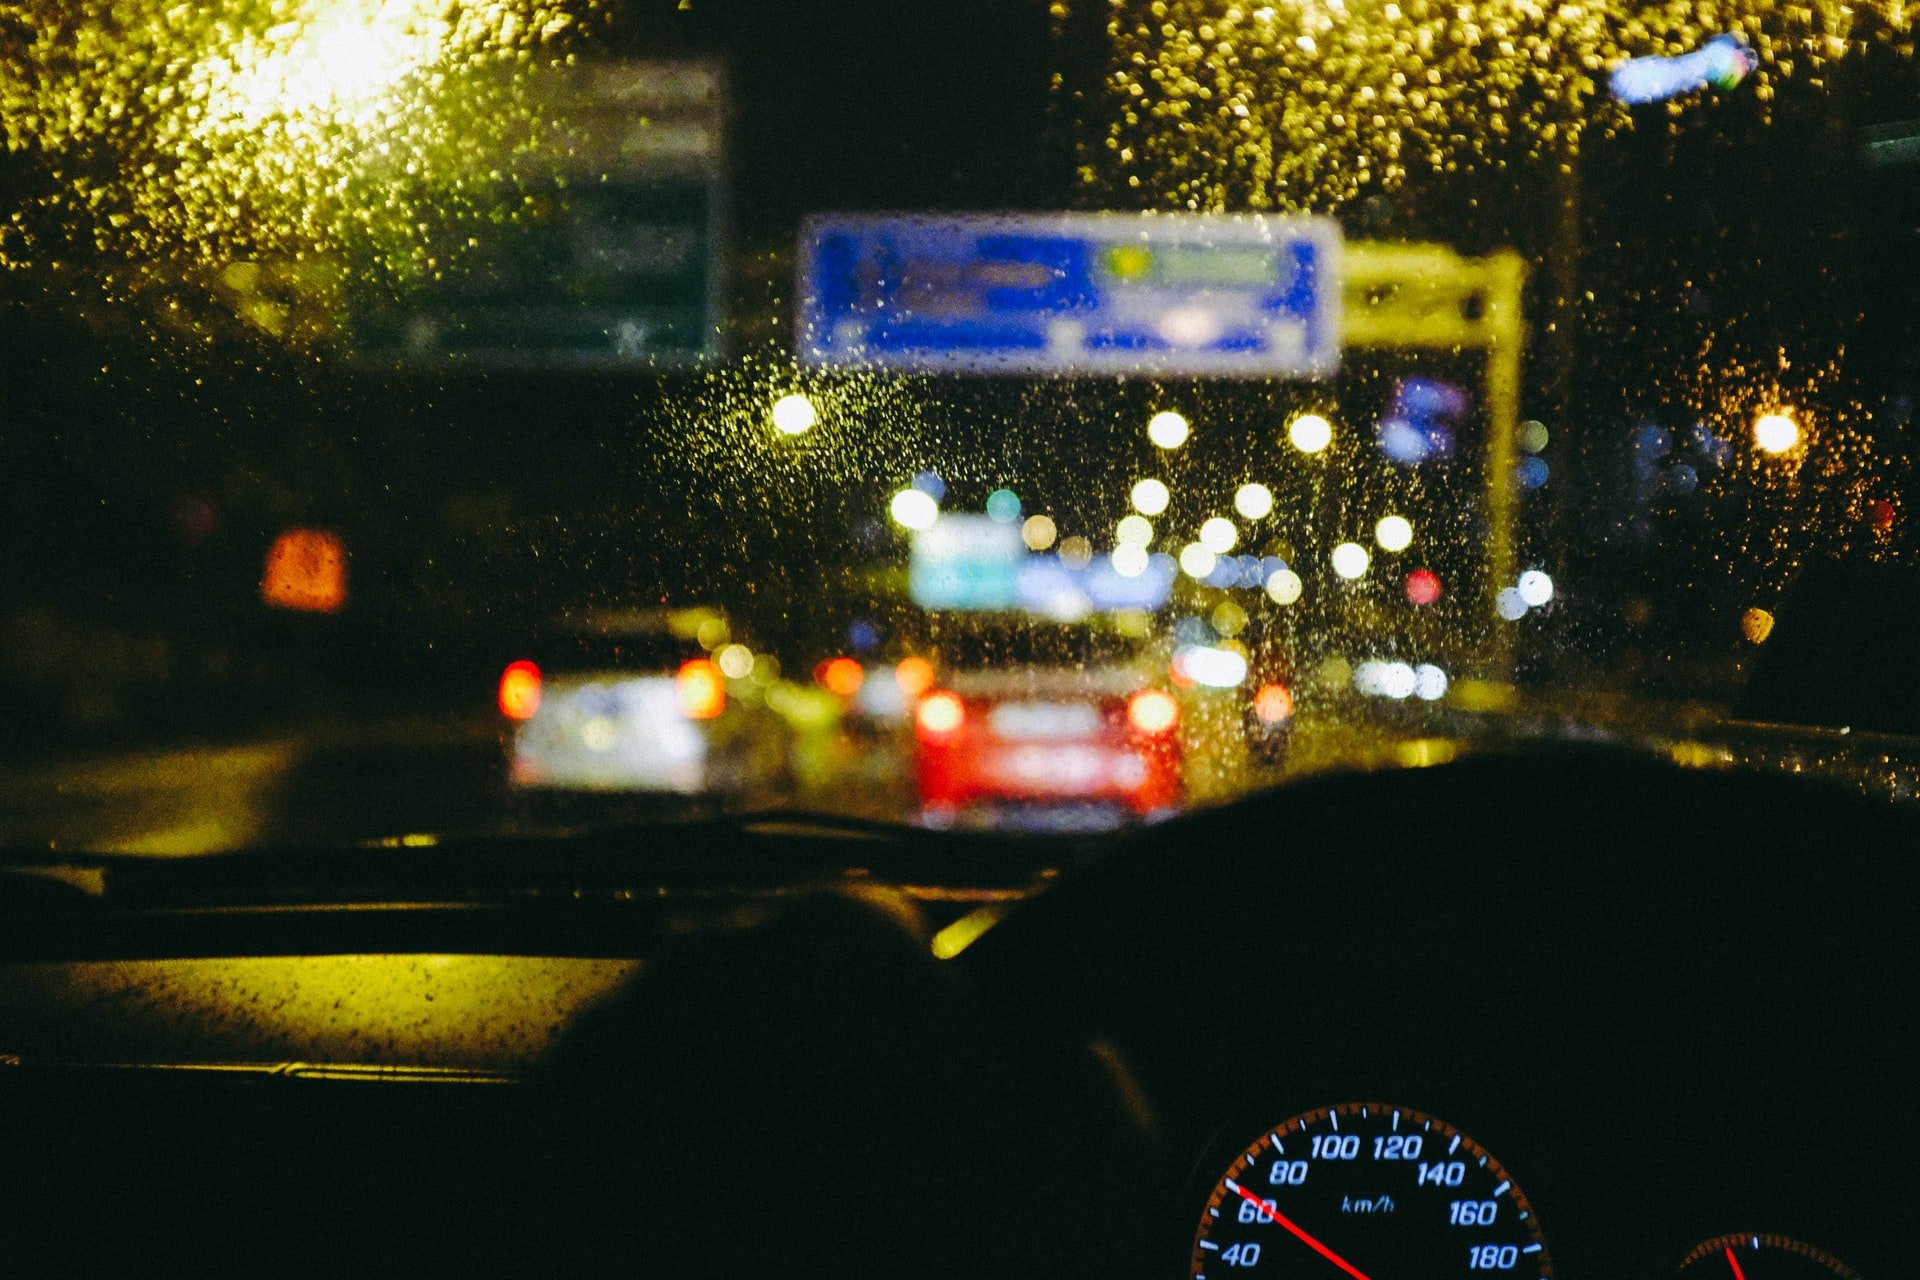 A car was following her | Source: Unsplash